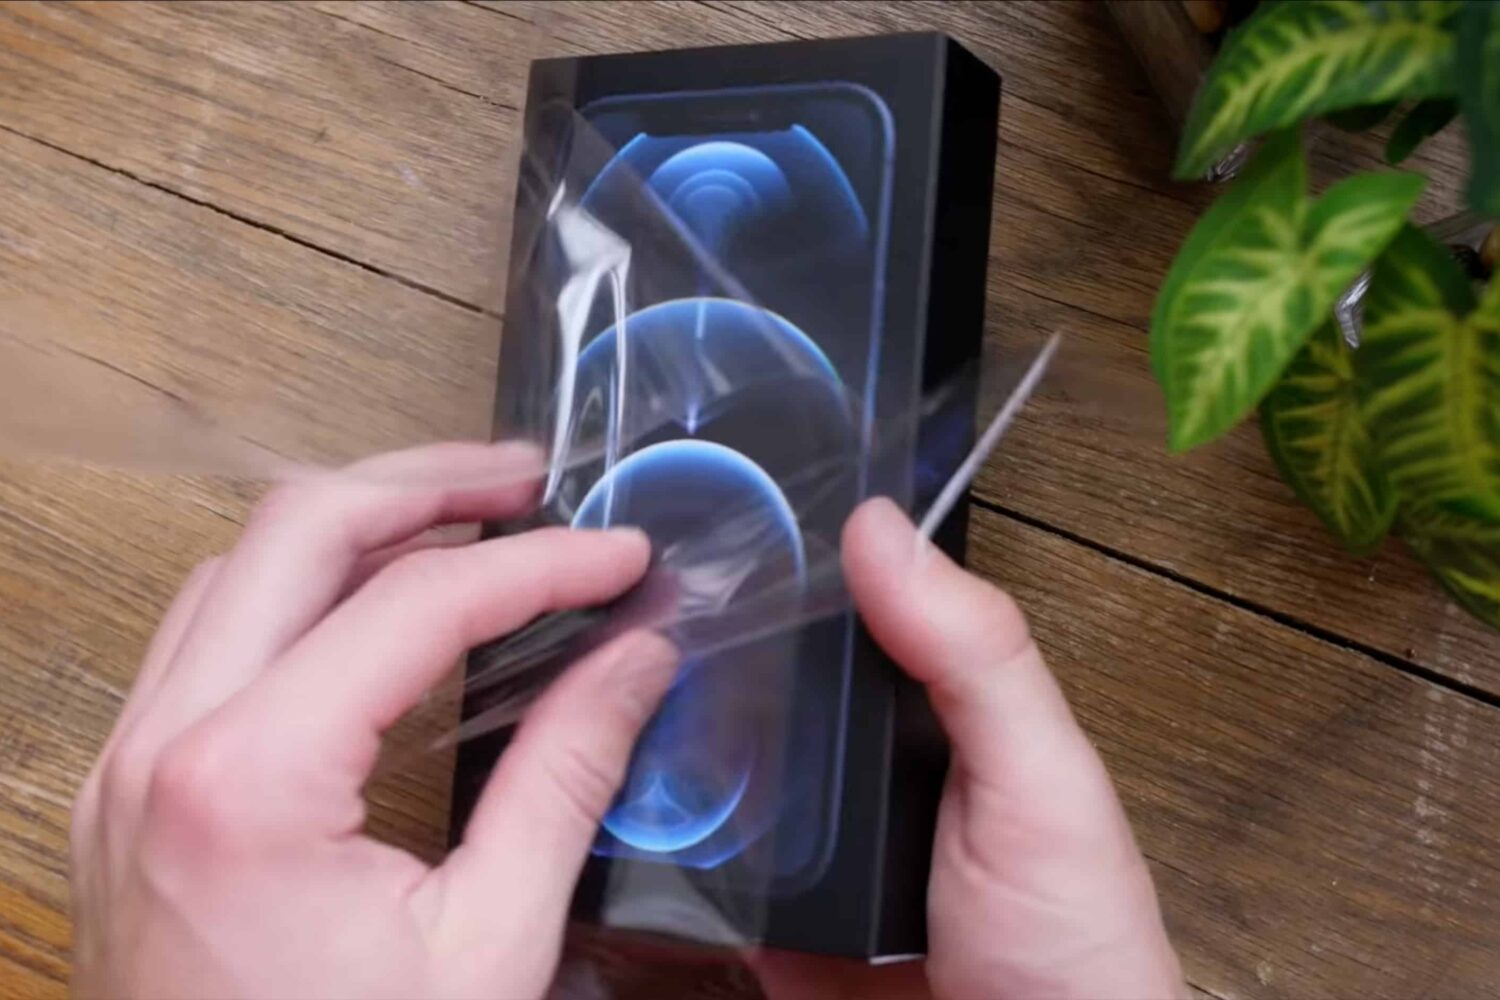 A still image from an iPhone 12 unboxing video that shows unwrapping the plastic wrapping of Apple's packaging for the phone